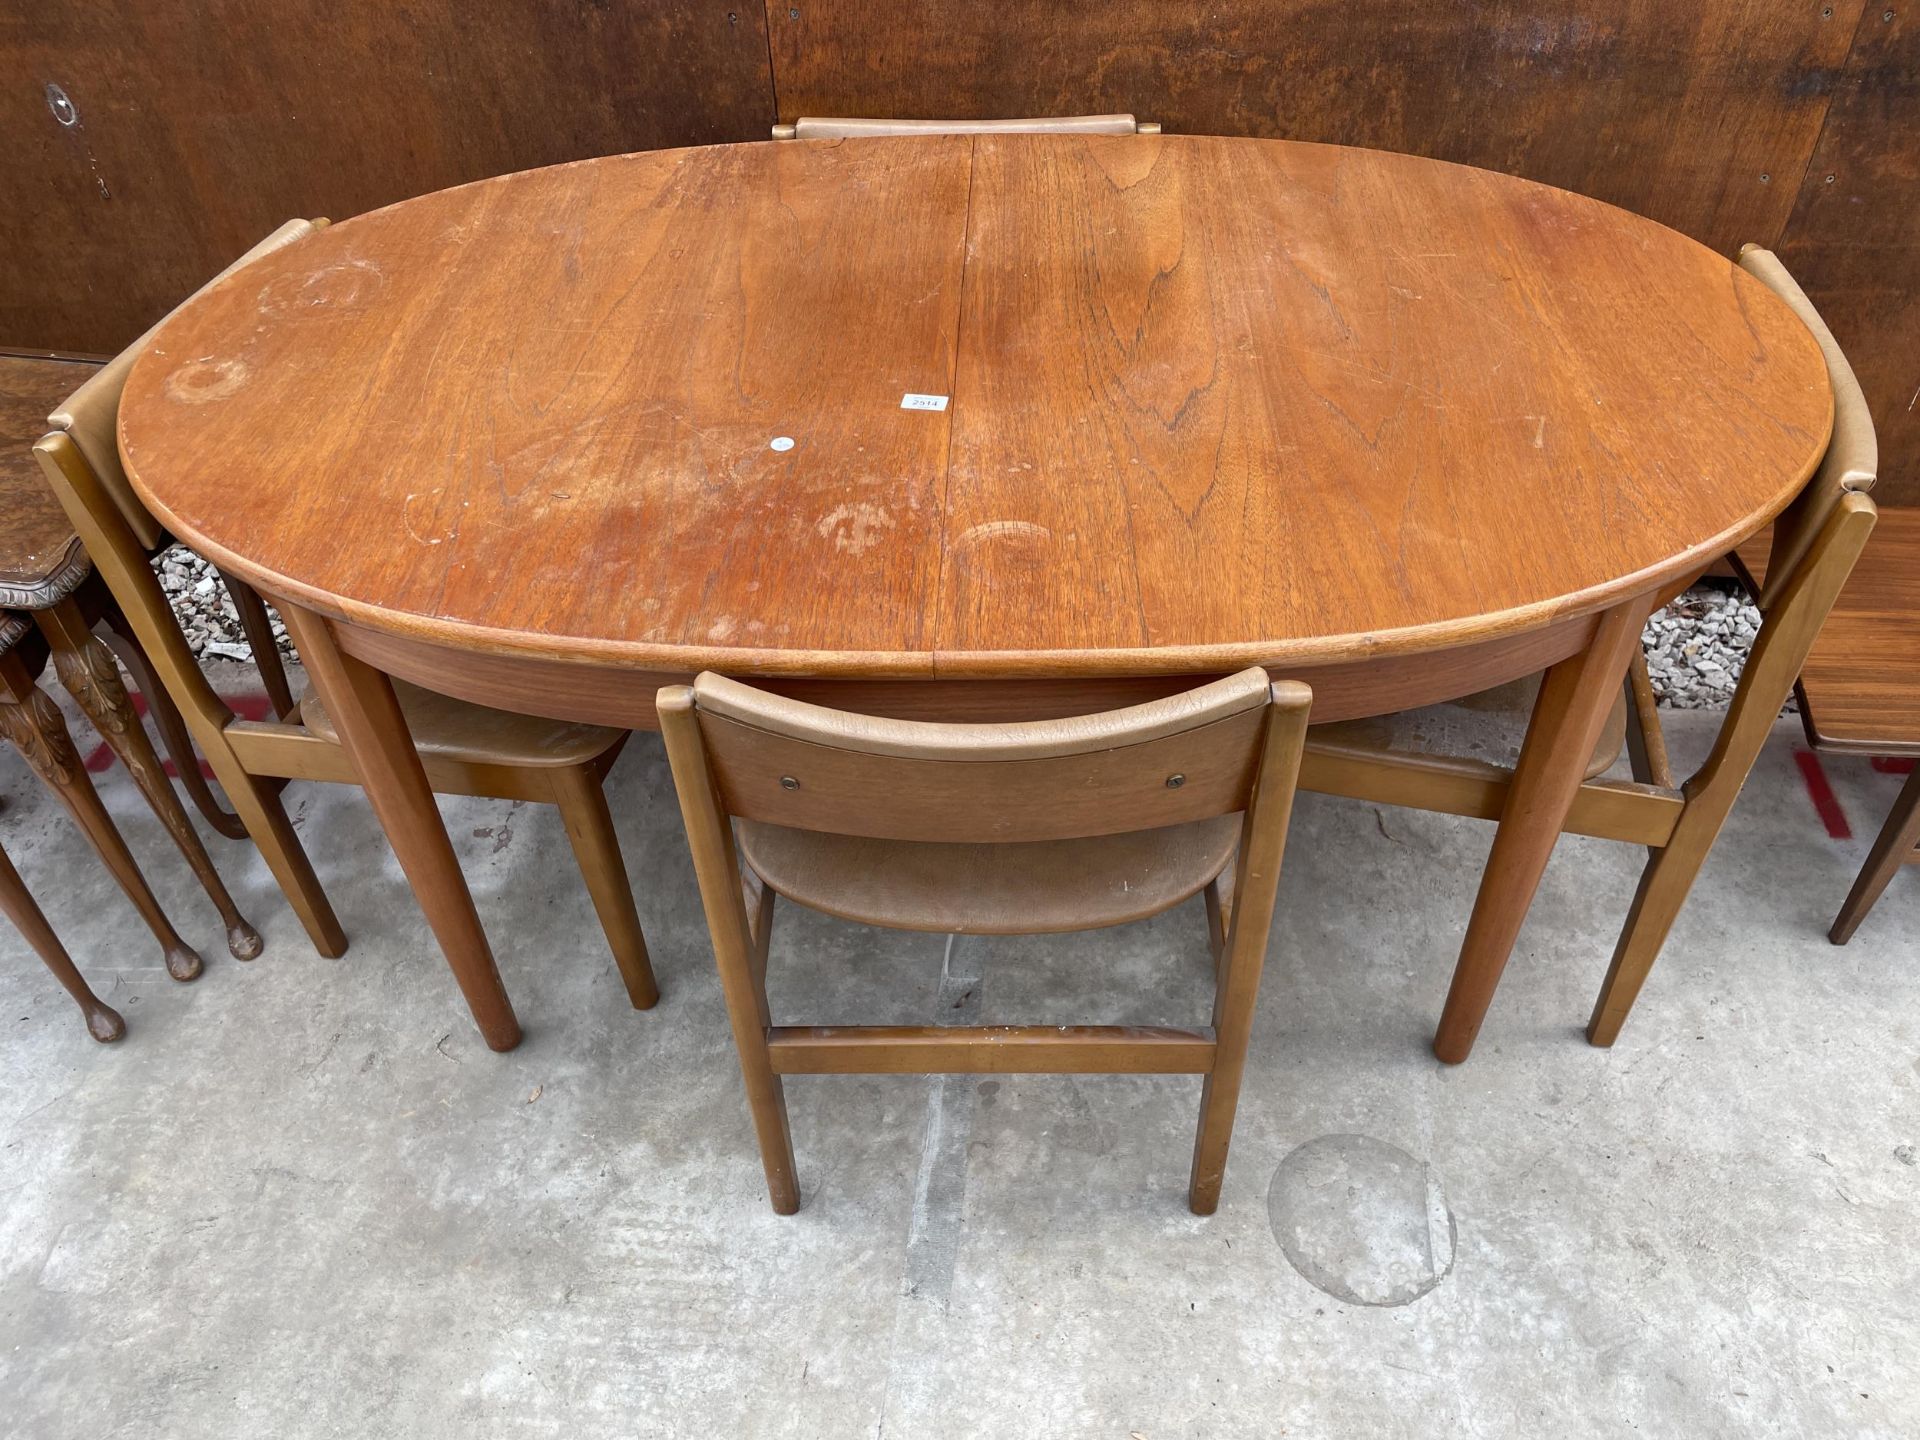 AN OVAL RETRO TEAK EXTENDING DINING TABLE, 60 X 36" (LEAF 18") AND FOUR CHAIRS